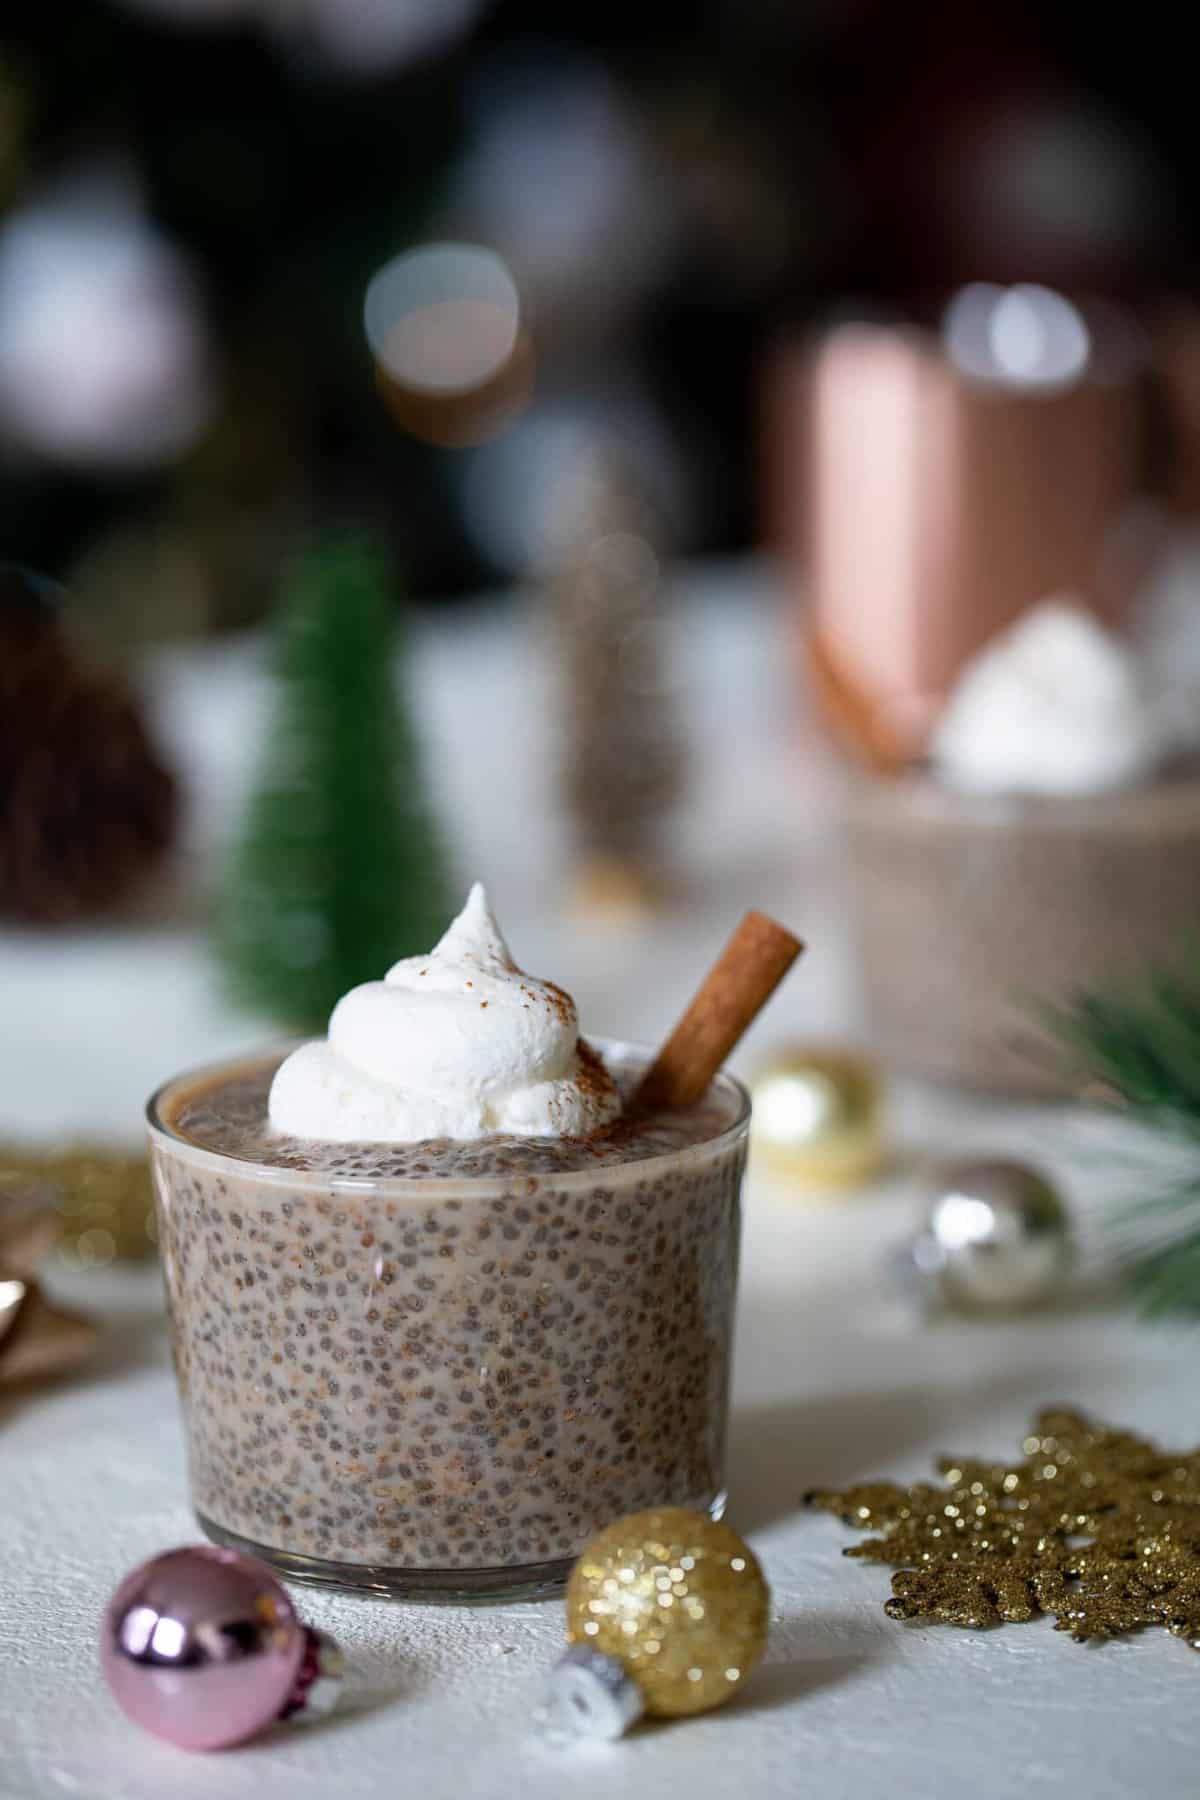 https://www.orchidsandsweettea.com/wp-content/uploads/2020/01/Chia-Pudding-3-of-5-scaled.jpg